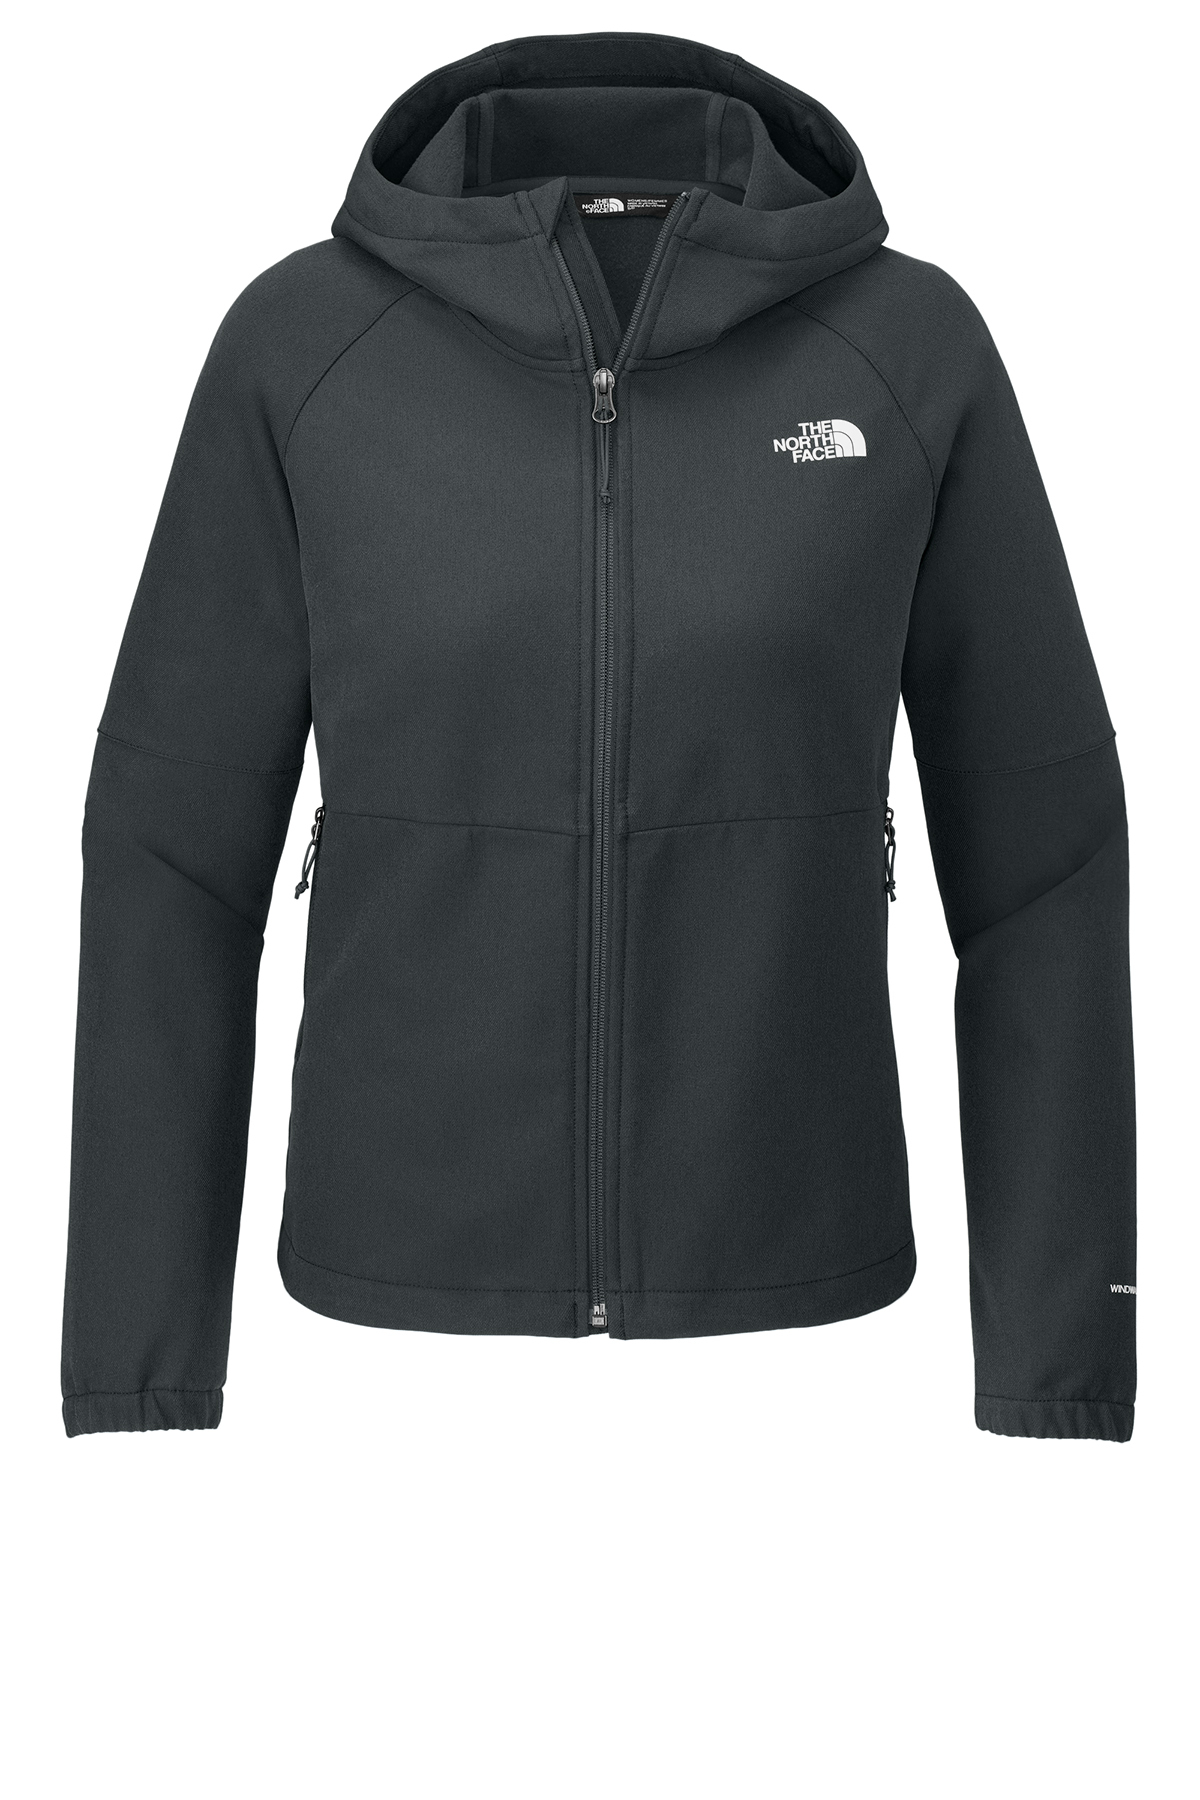 The North Face Ladies Barr Lake Hooded Soft Shell Jacket | Product 